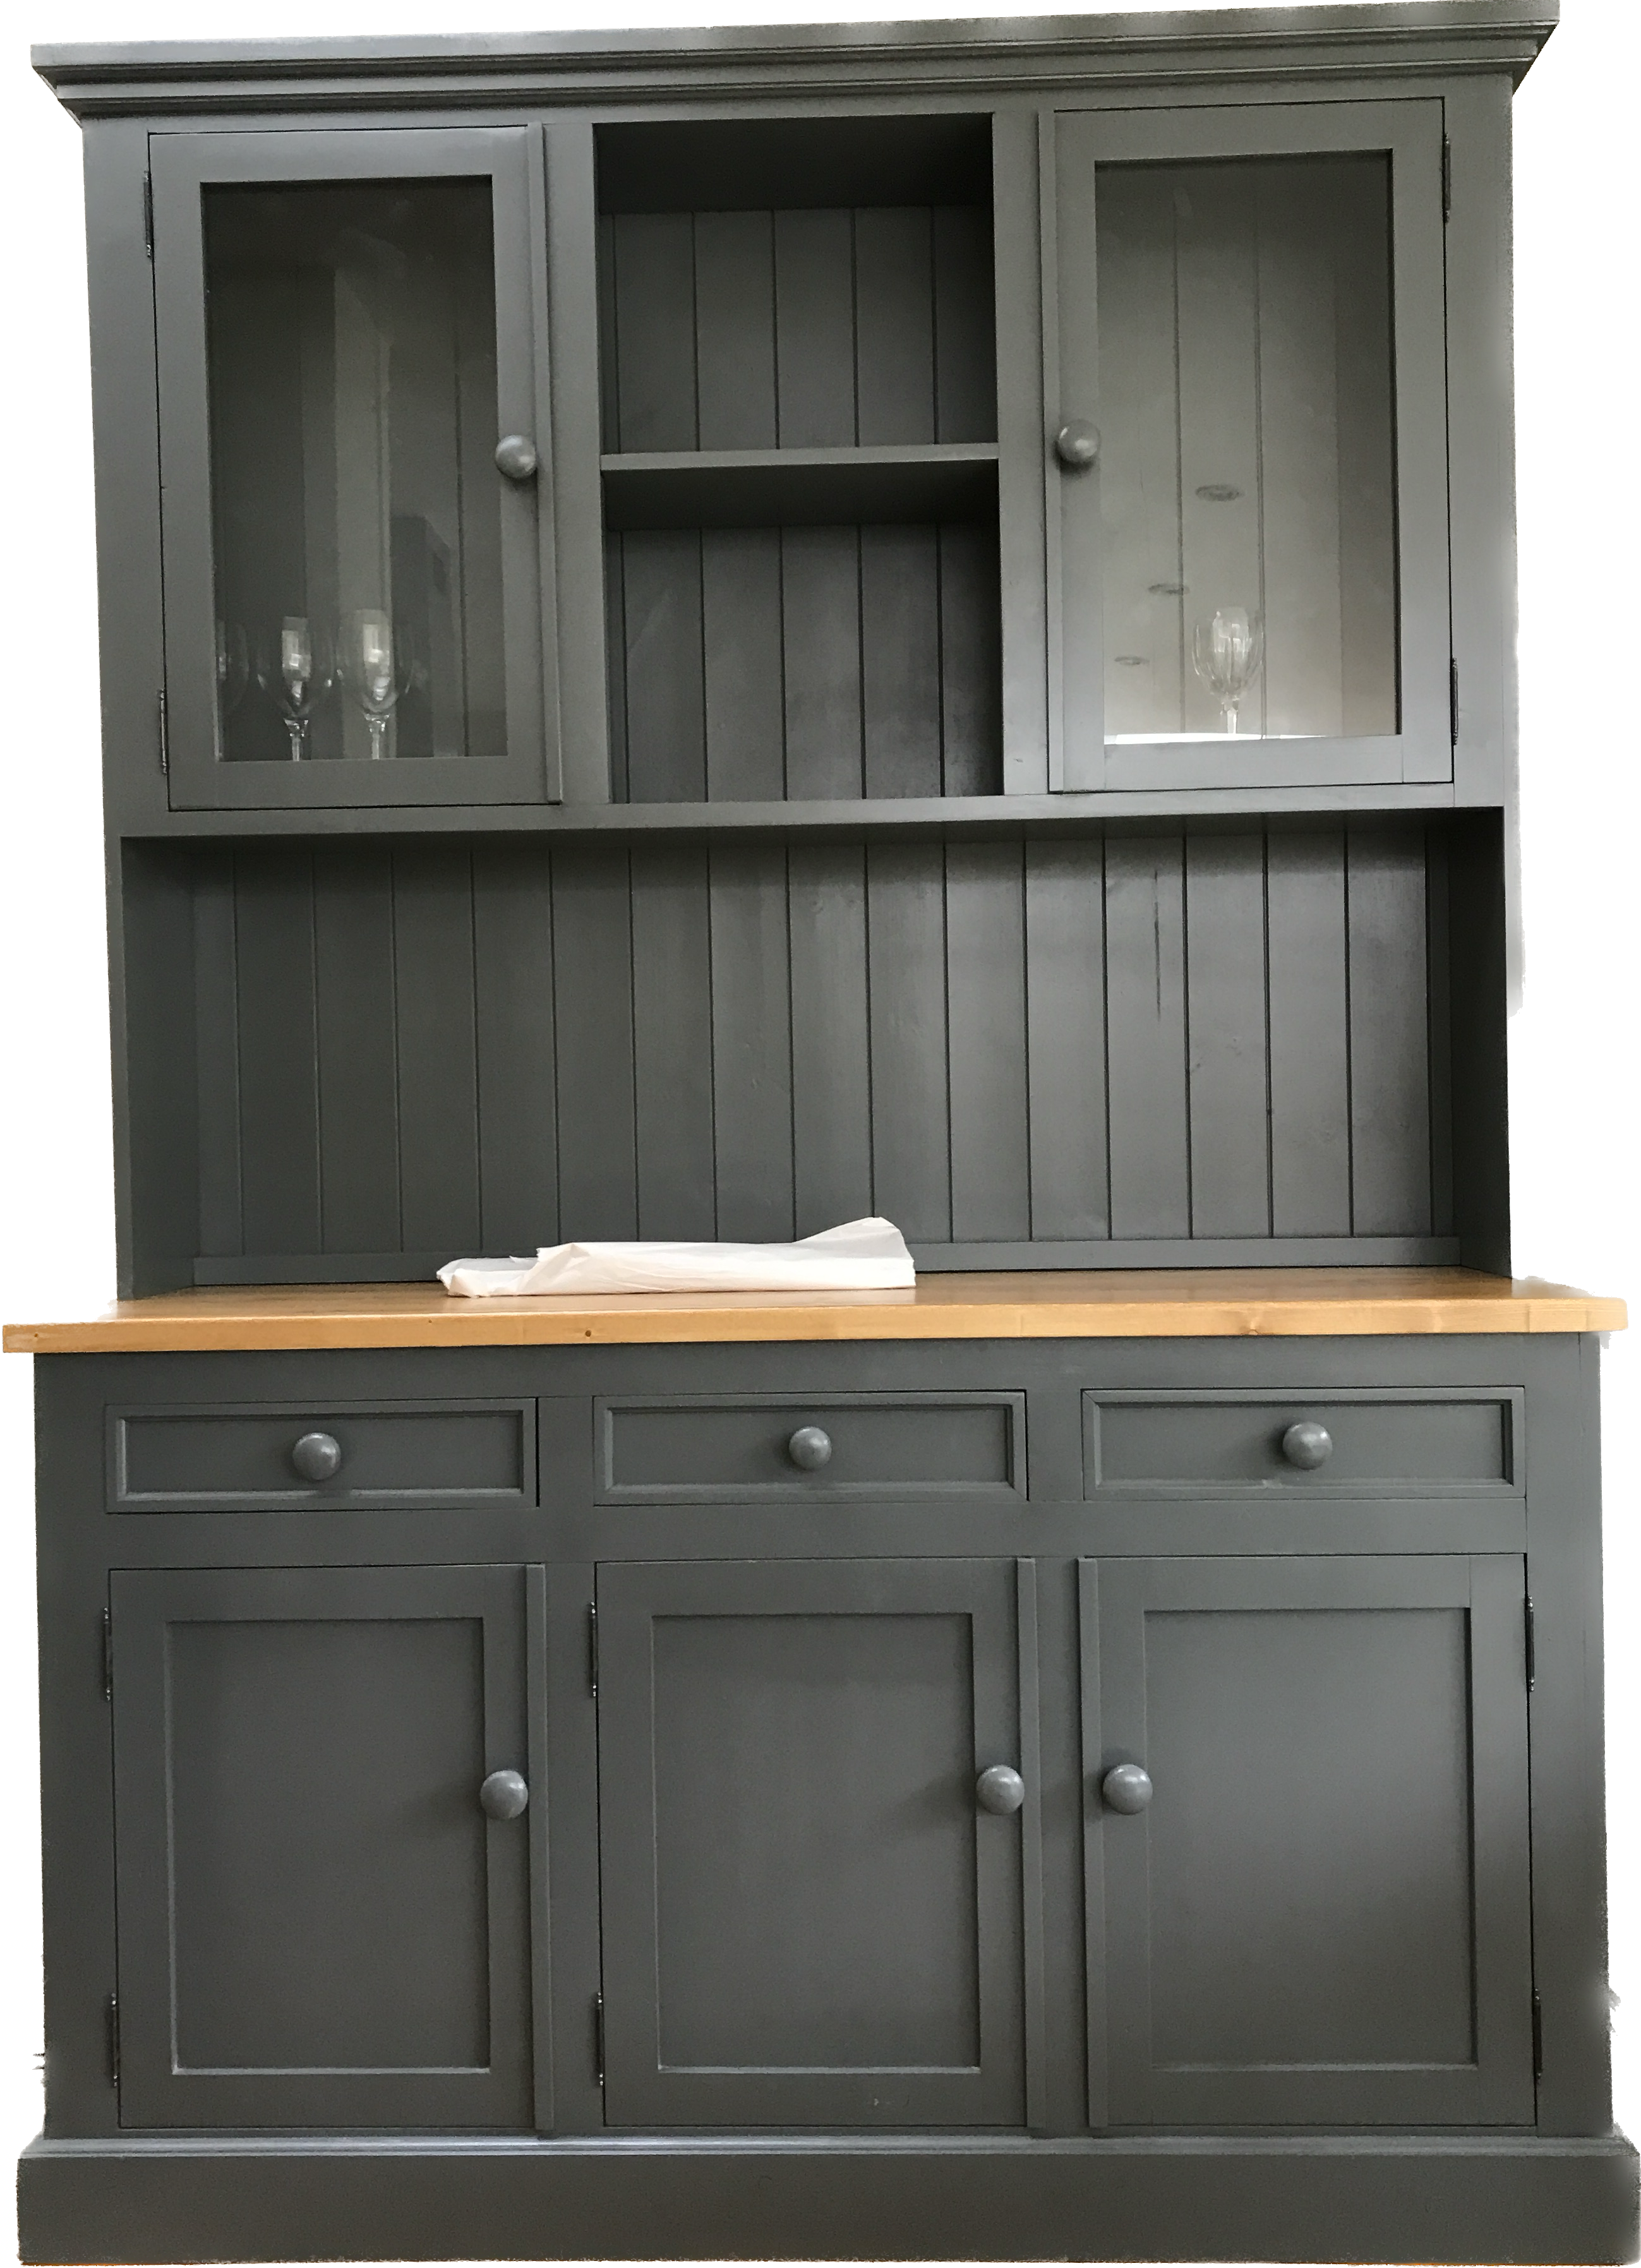 TRADITIONAL kITCHEN DRESSERS